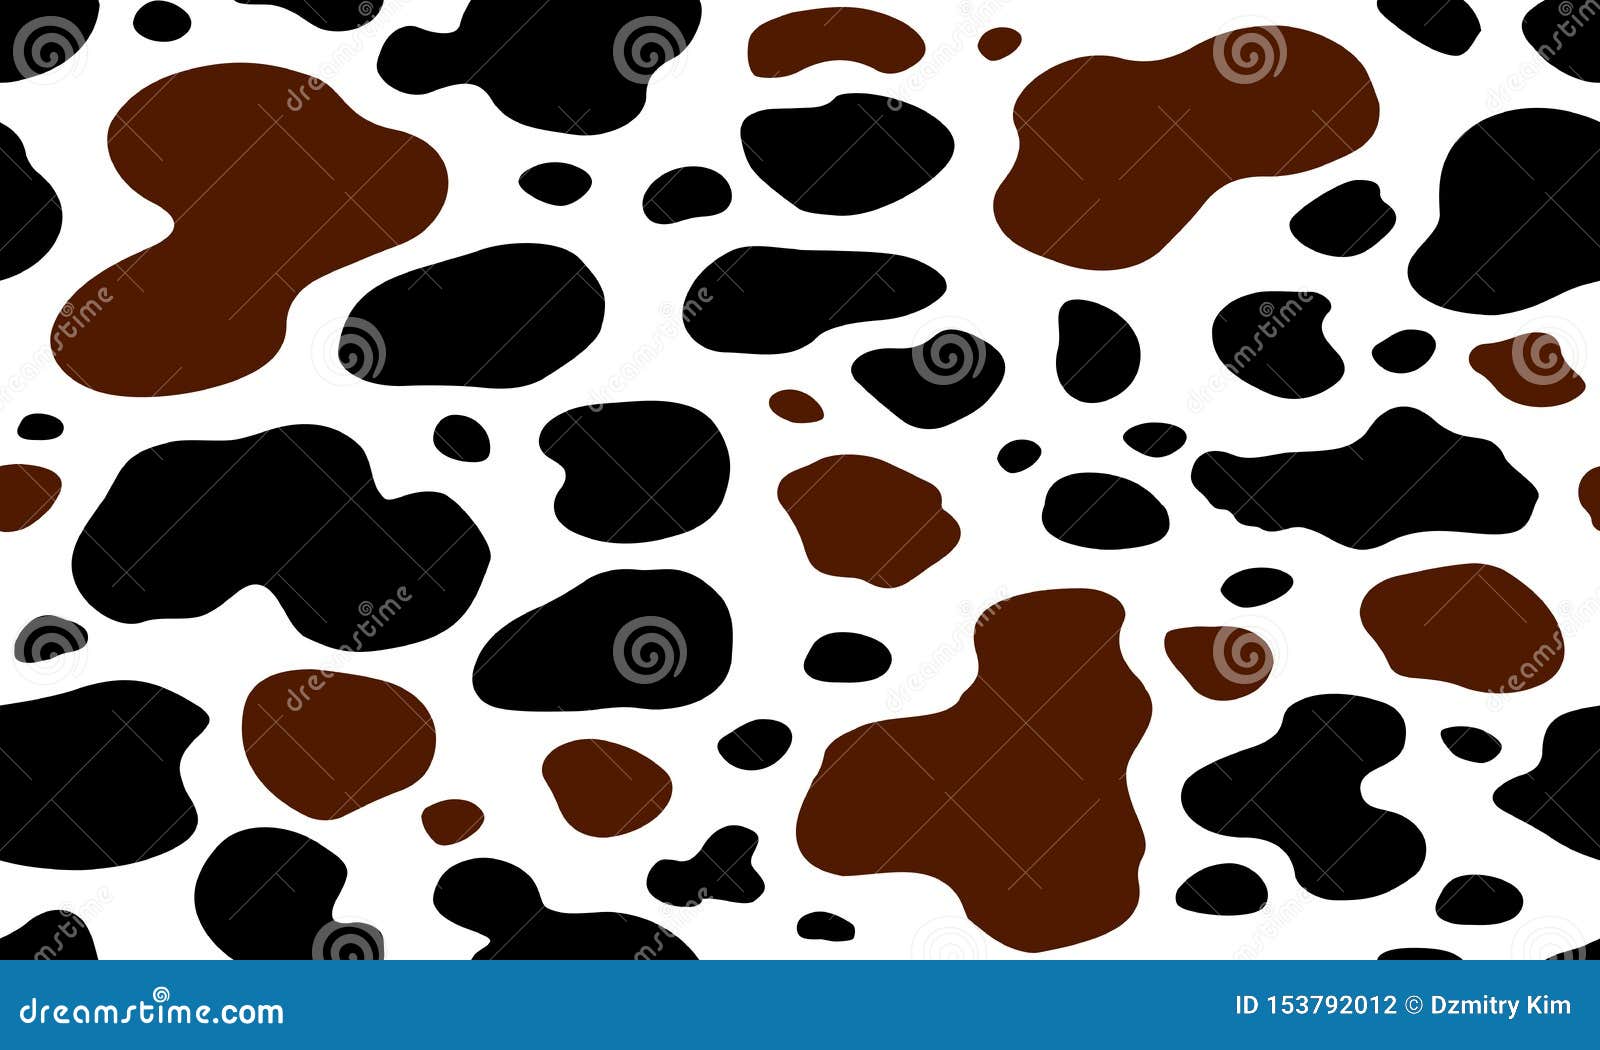 Cow Texture Pattern Repeated Seamless Brown and White Spot Skin Fur Stock Vector - Illustration of isolated, grunge: 153792012